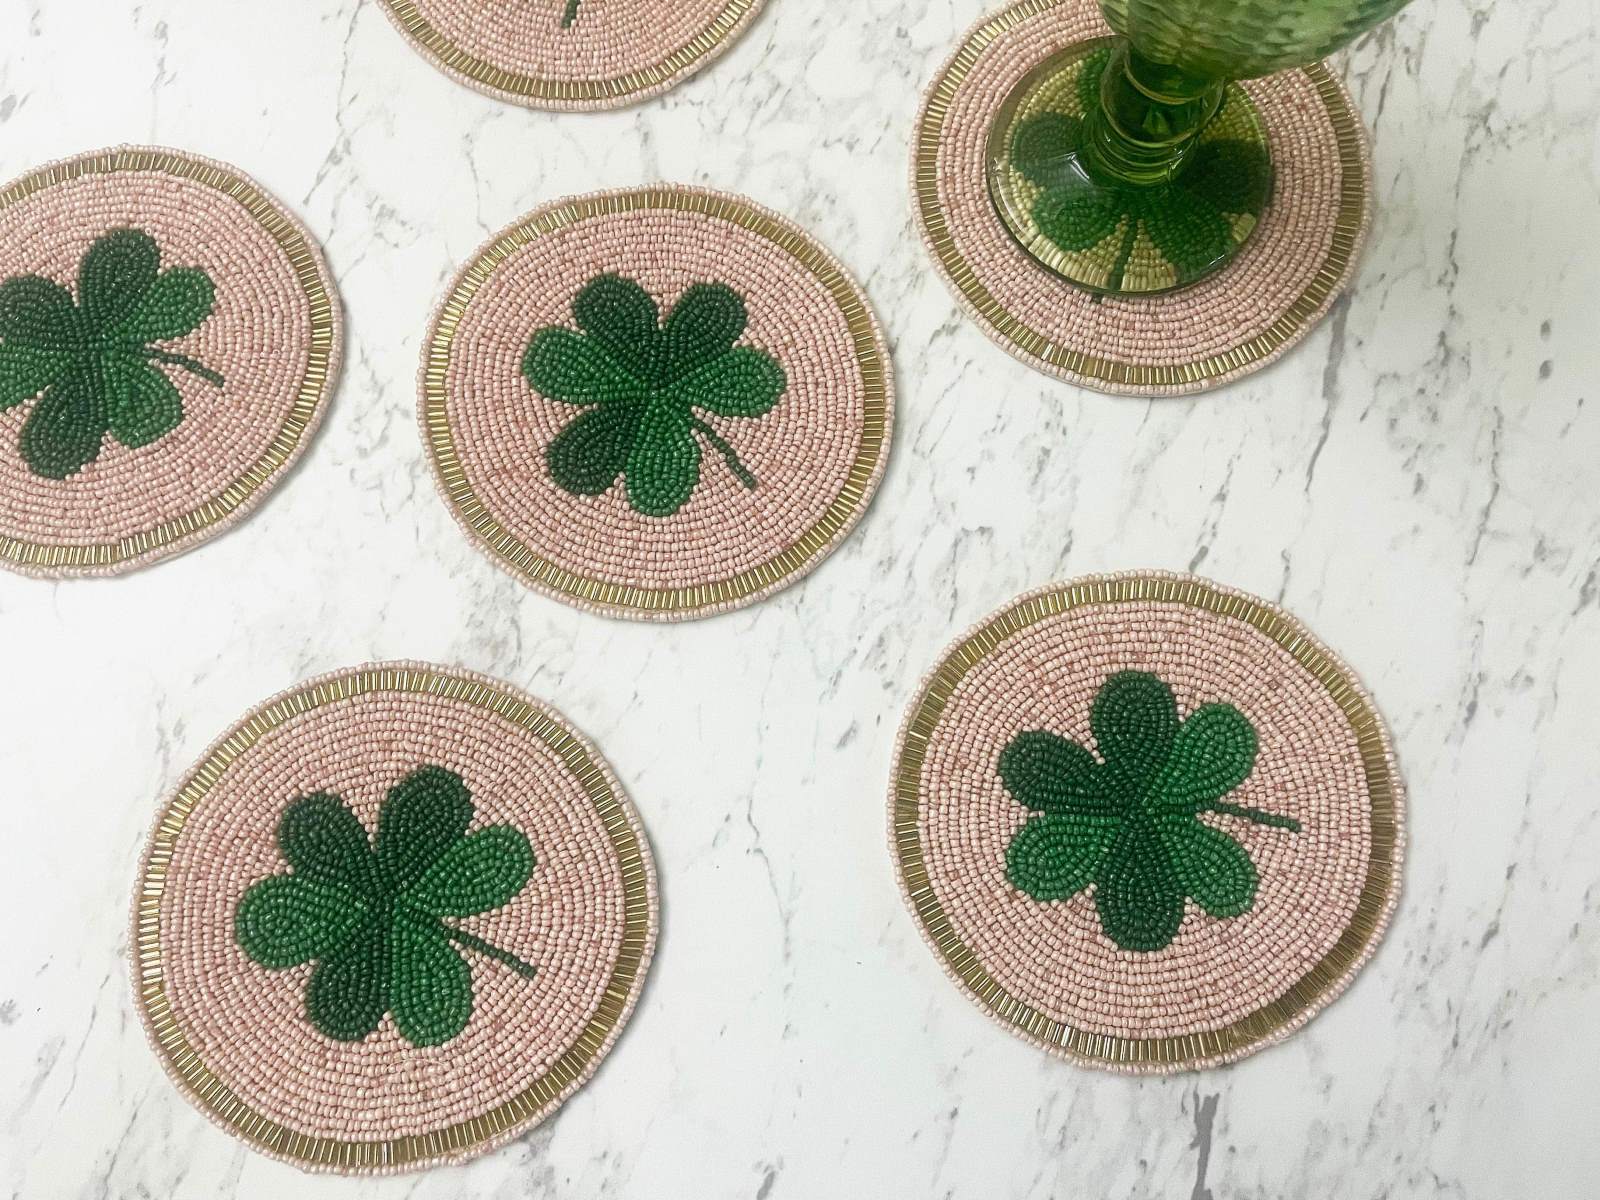 Crafty Clover Coasters: DIY Home Improvement For St. Patrick's Day